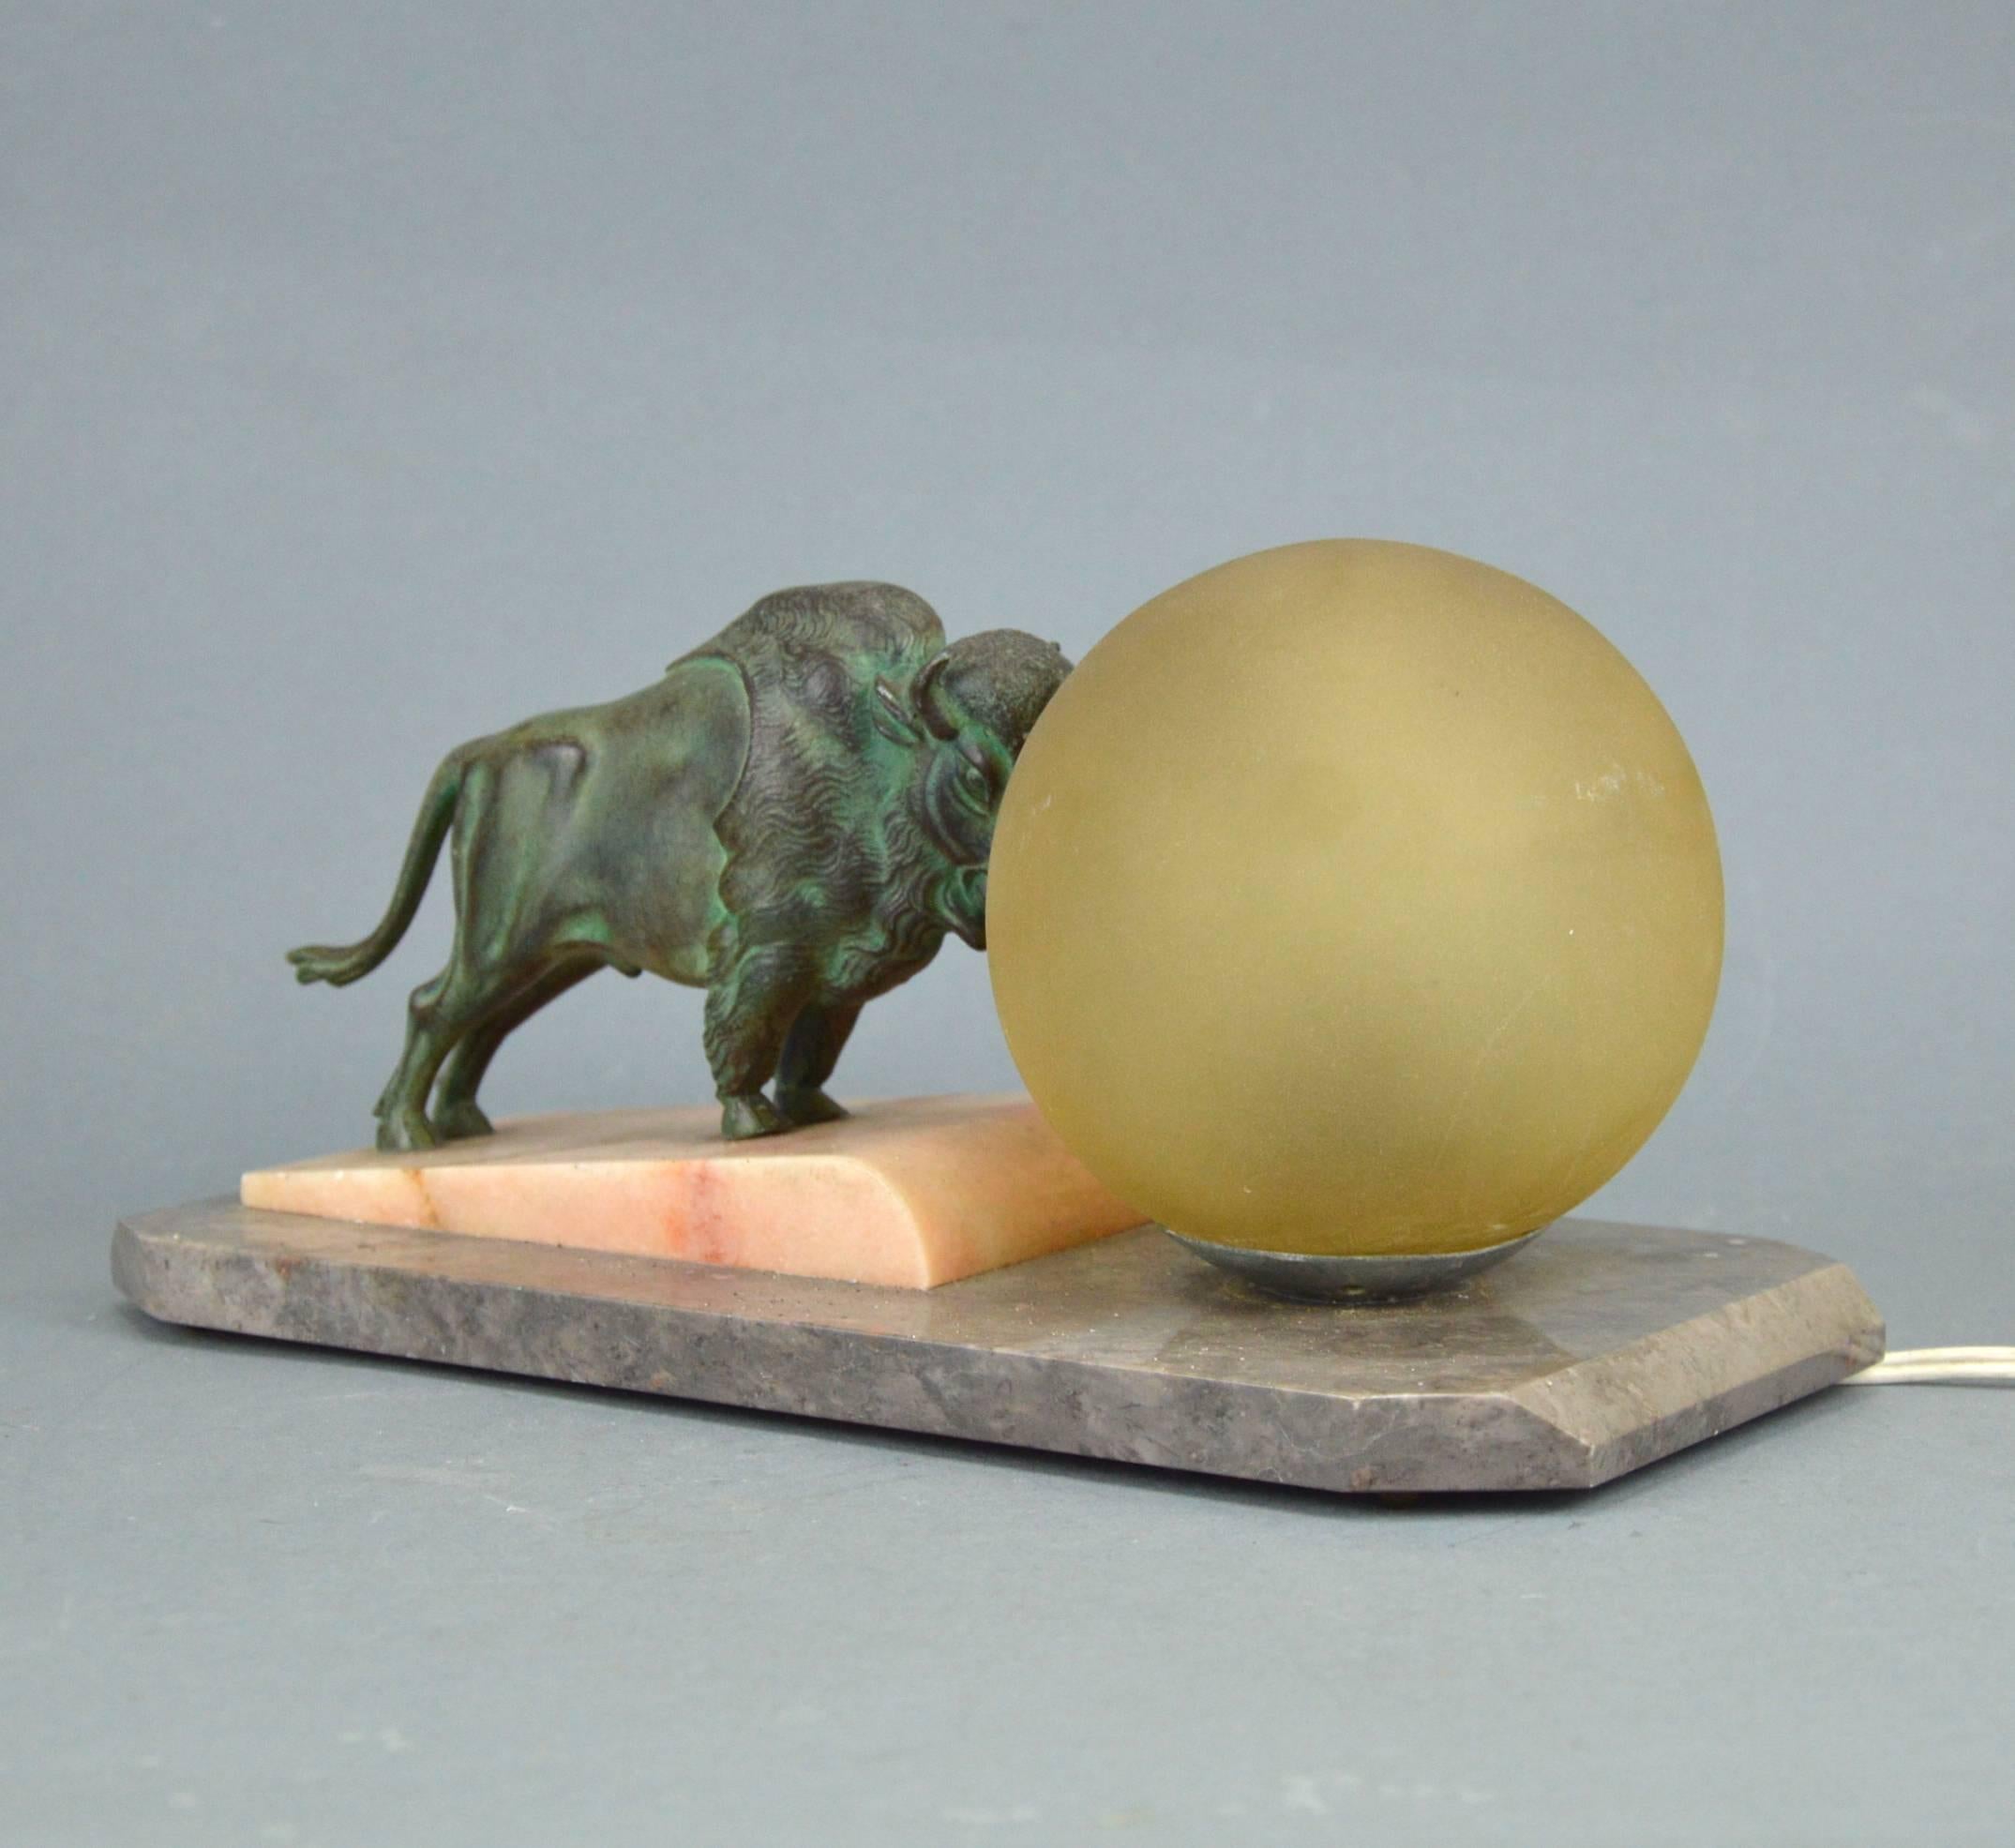 French Beautiful Original Art Deco Lamp Representing a Bison Pushing a Ball, 1920